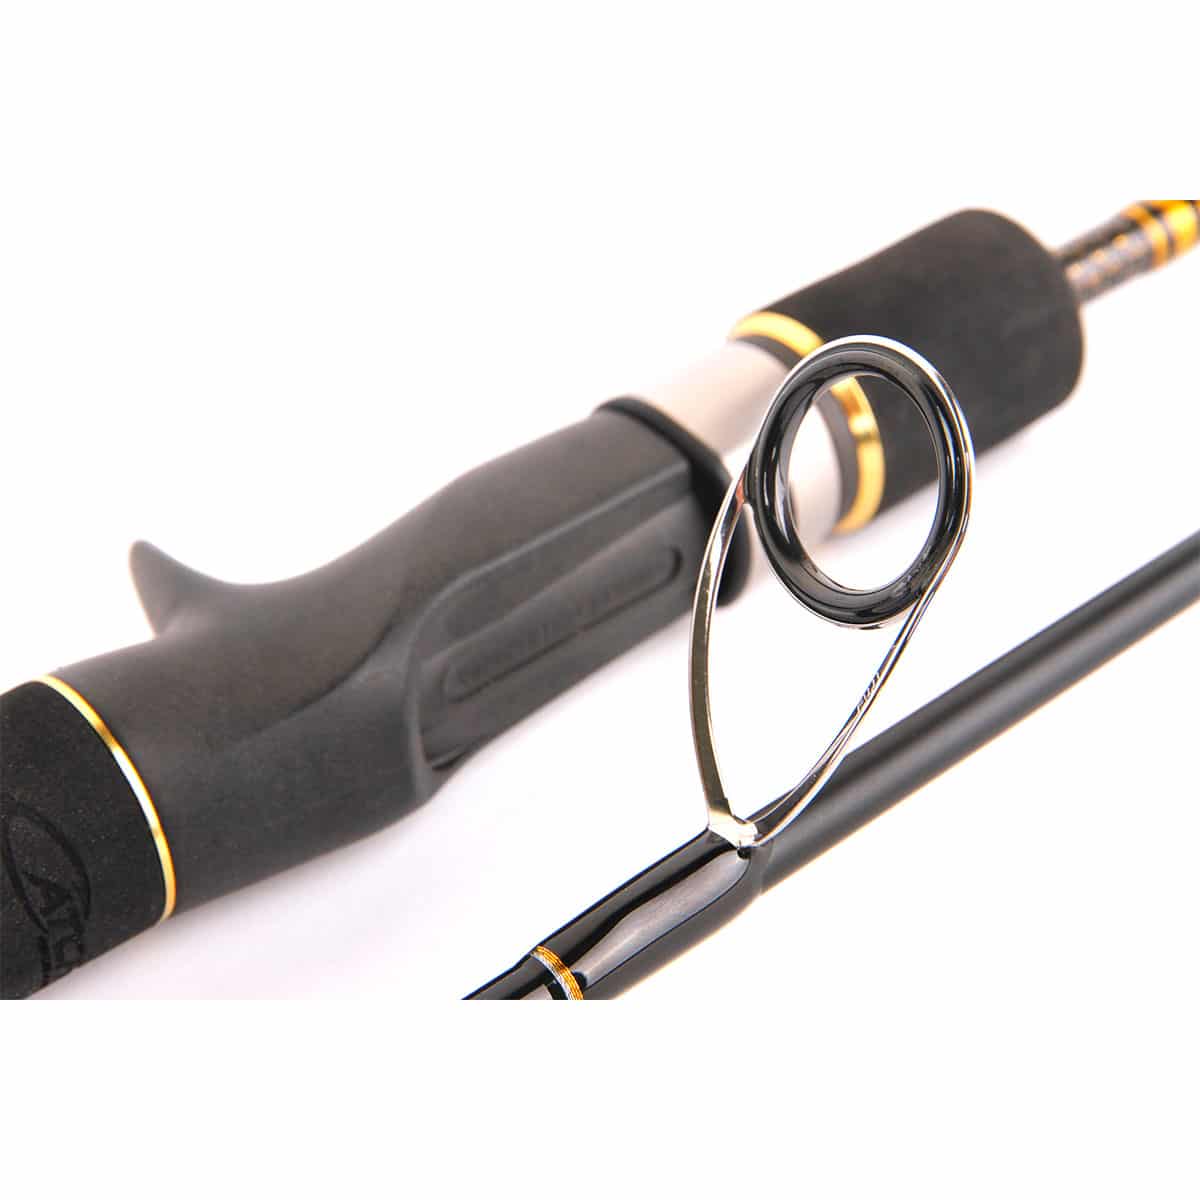 Catch Kensai Pro Series 150g Slow Pitch Jig Rod Lure Weight 80 to